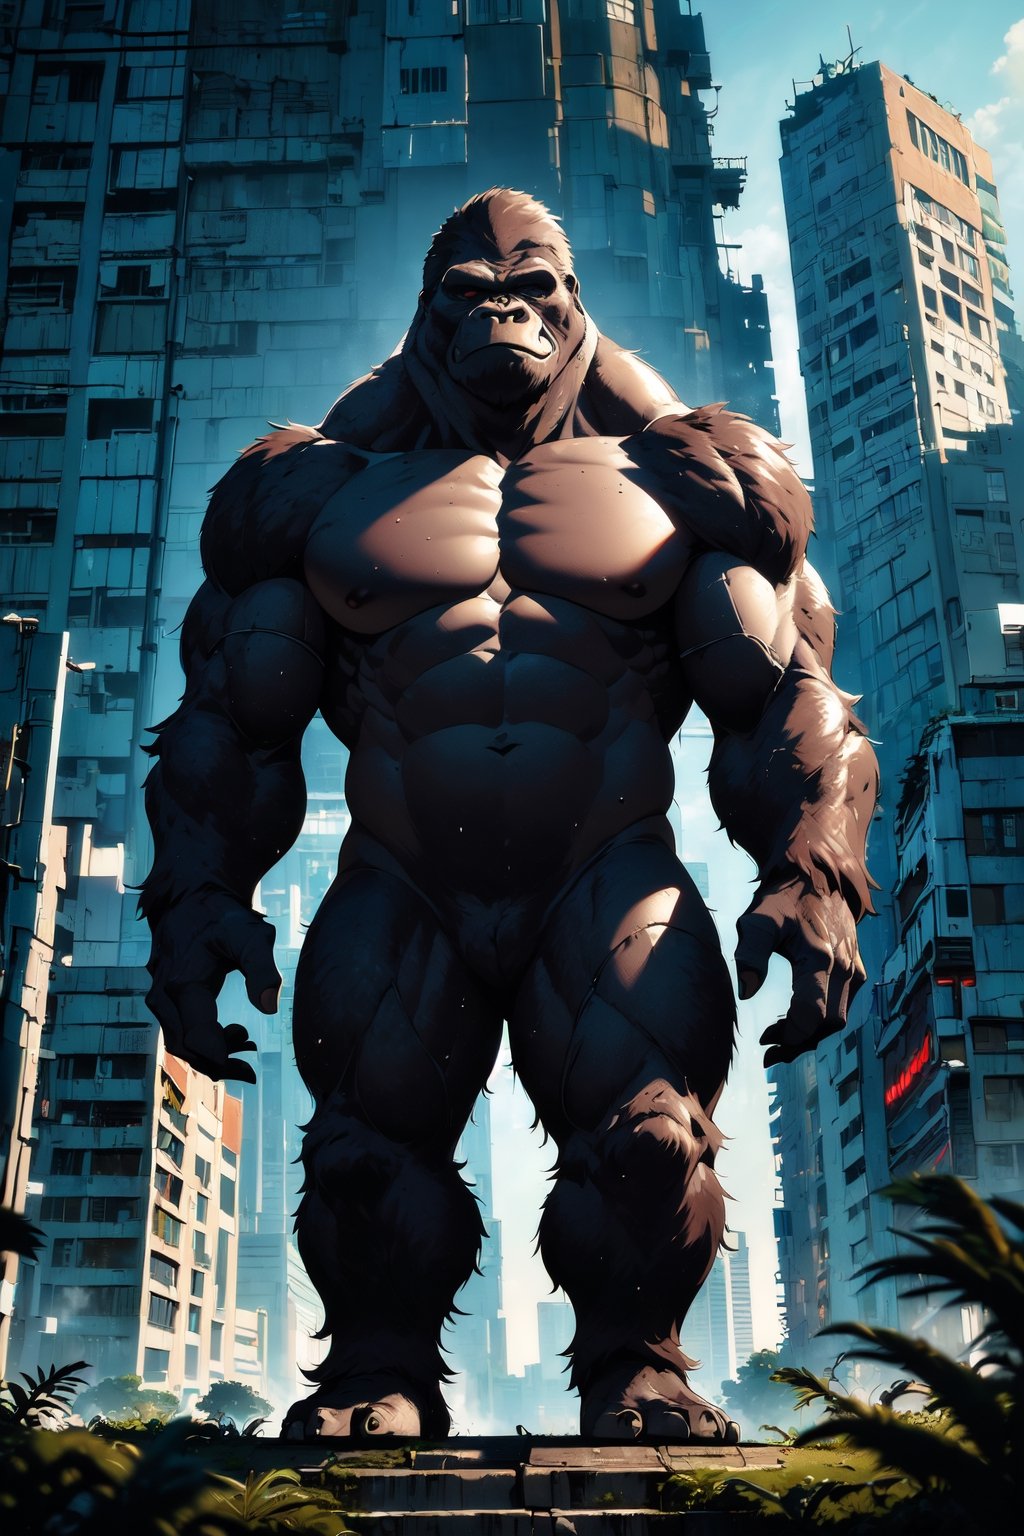 (Masterpiece:1.5), (Best quality:1.5), Cyberpunk style, full body, A towering King Kong, amidst a ruined city, bellows in fury. The massive creature, its fur a shimmering silver, muscles rippling beneath its majestic form, stands as a symbol of primal power and untamed beauty. This remarkable image is a digitally enhanced photograph, capturing every intricate detail with stunning clarity and depth. The backdrop of crumbling buildings and twisted metal only serves to enhance the gorilla's imposing presence, making it a truly unforgettable sight. With each pixel meticulously crafted, this image exudes a sense of awe and wonder, leaving viewers breathless in the face of such magnificence, King Kong, Magic Forest